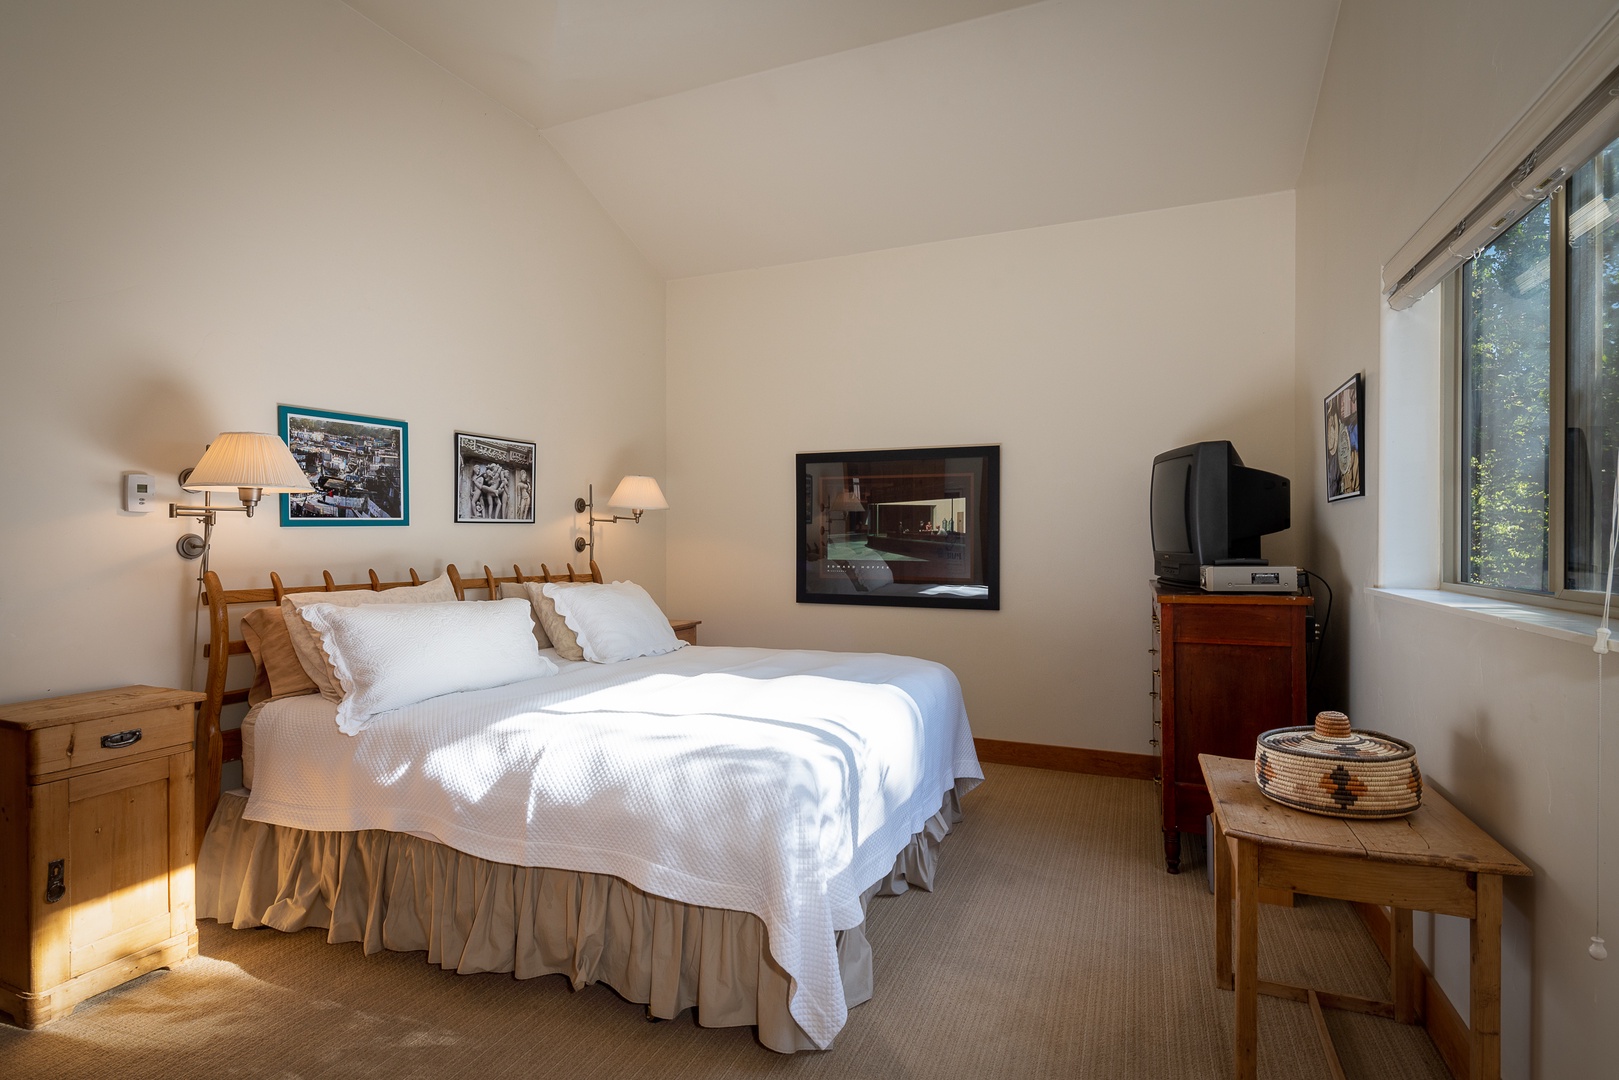 Ketchum Vacation Rentals, Bridgepoint Charm - The Primary Bedroom is equipped with a king bed, TV, and ensuite bathroom